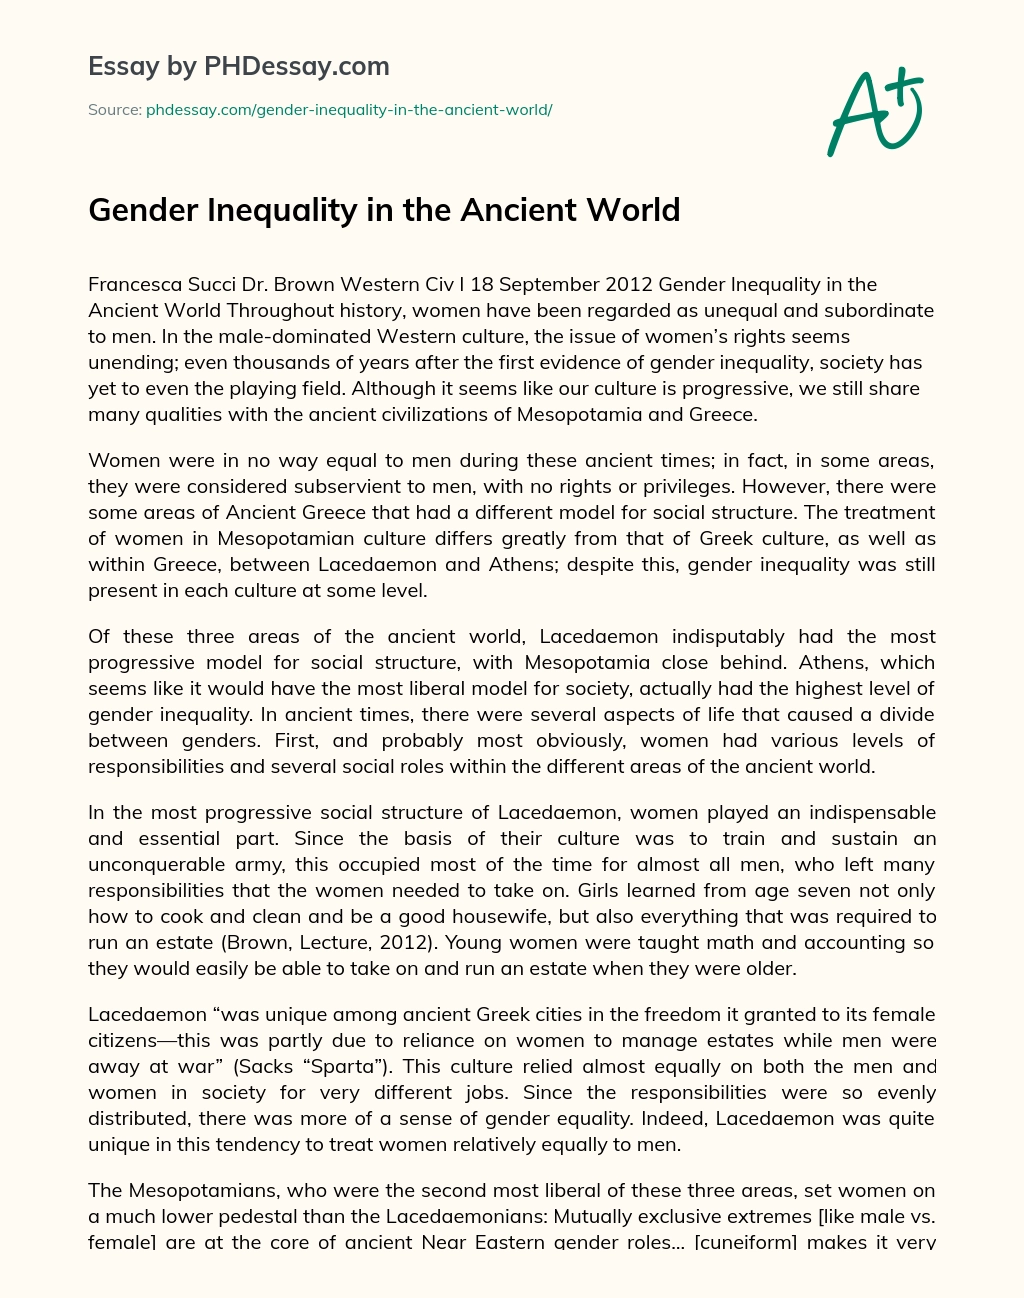 Gender Inequality in the Ancient World essay